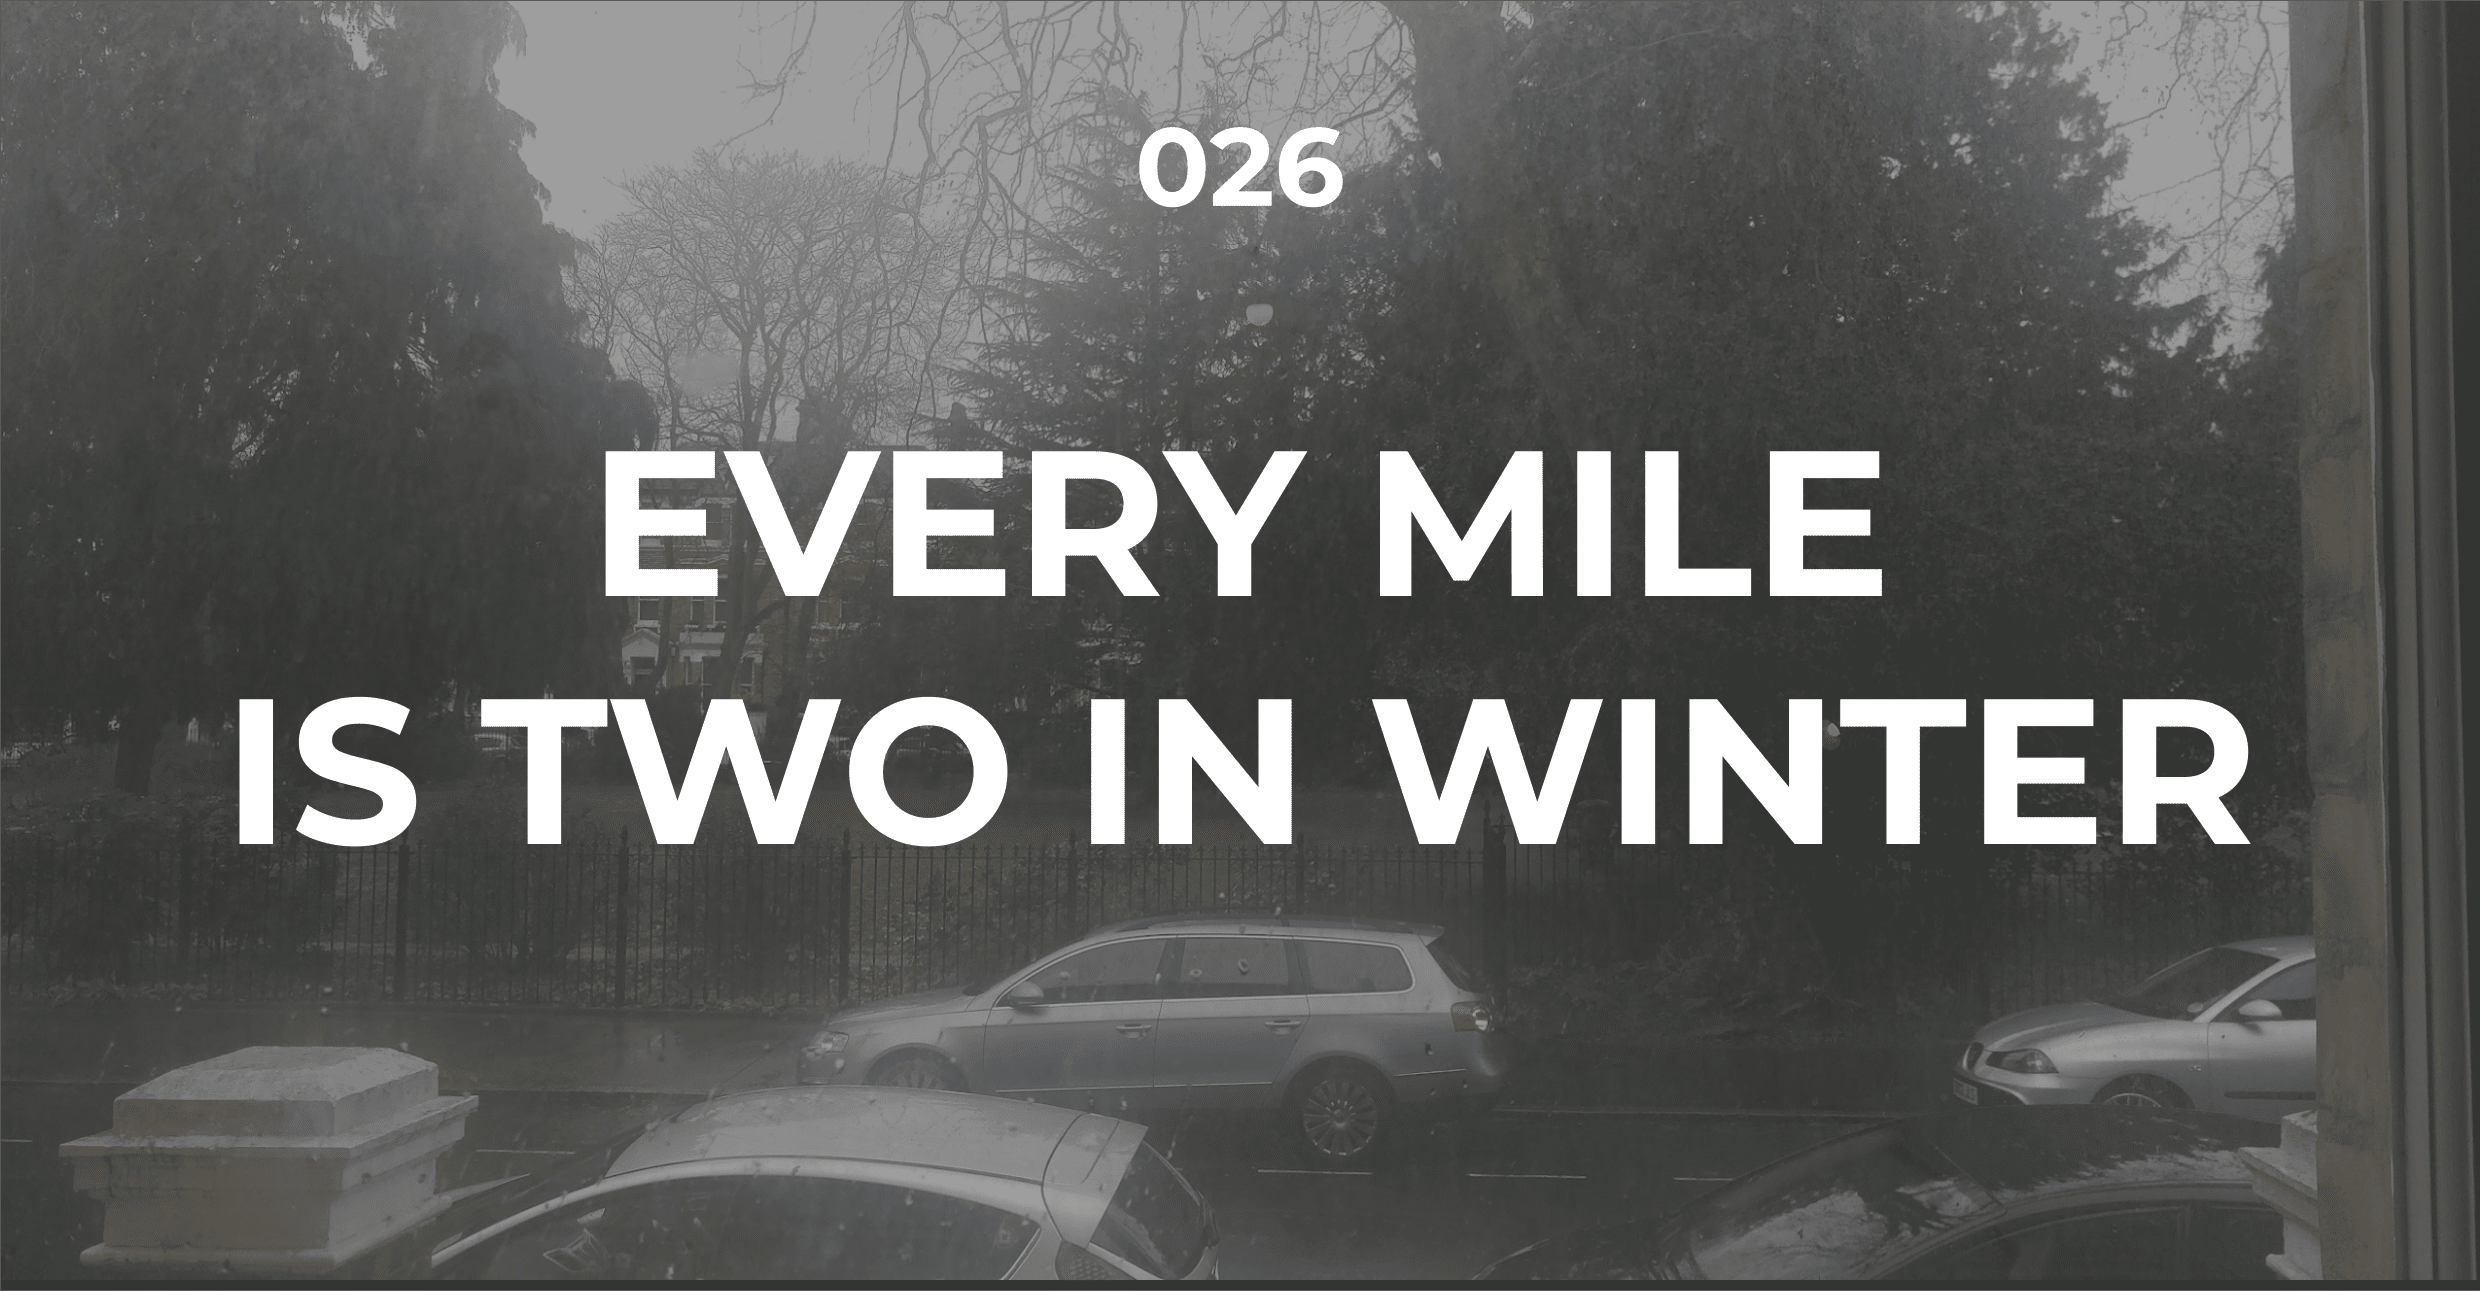 Every mile is two in winter